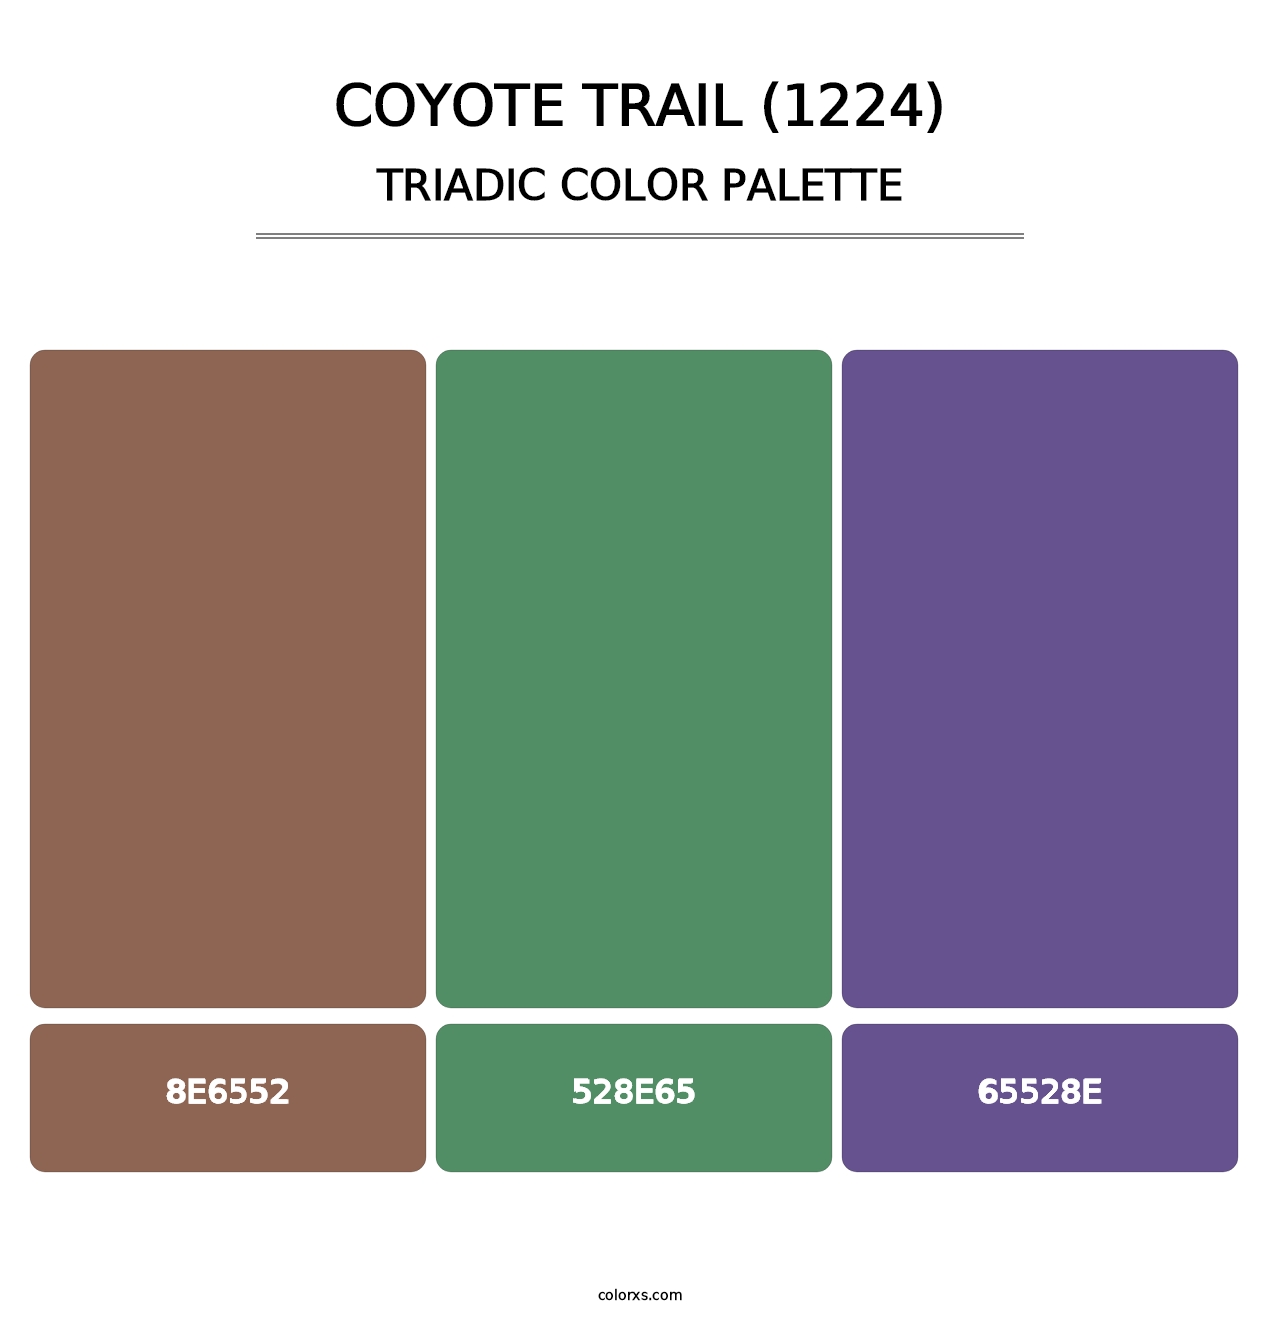 Coyote Trail (1224) - Triadic Color Palette